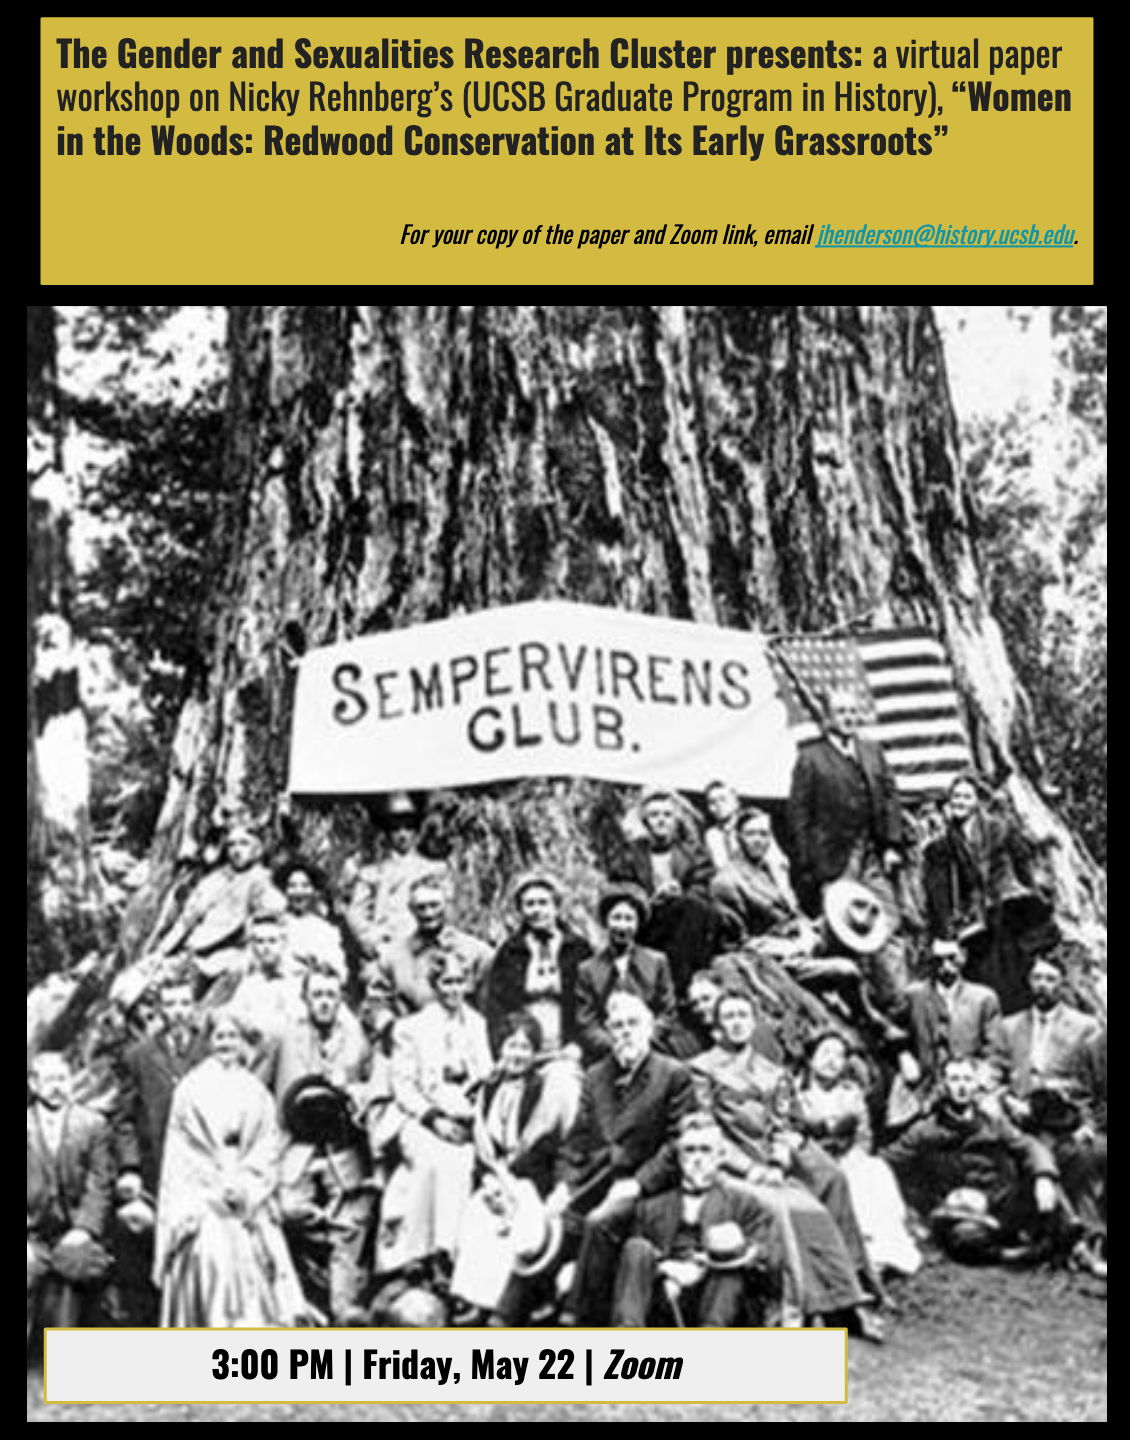 Flyer for Zoom talk for a paper workshop on Nicky Rehnberg's "Women in the Woods: Redwood Conservation at Its Early Grassroots" on 5/22/20 at 3PM